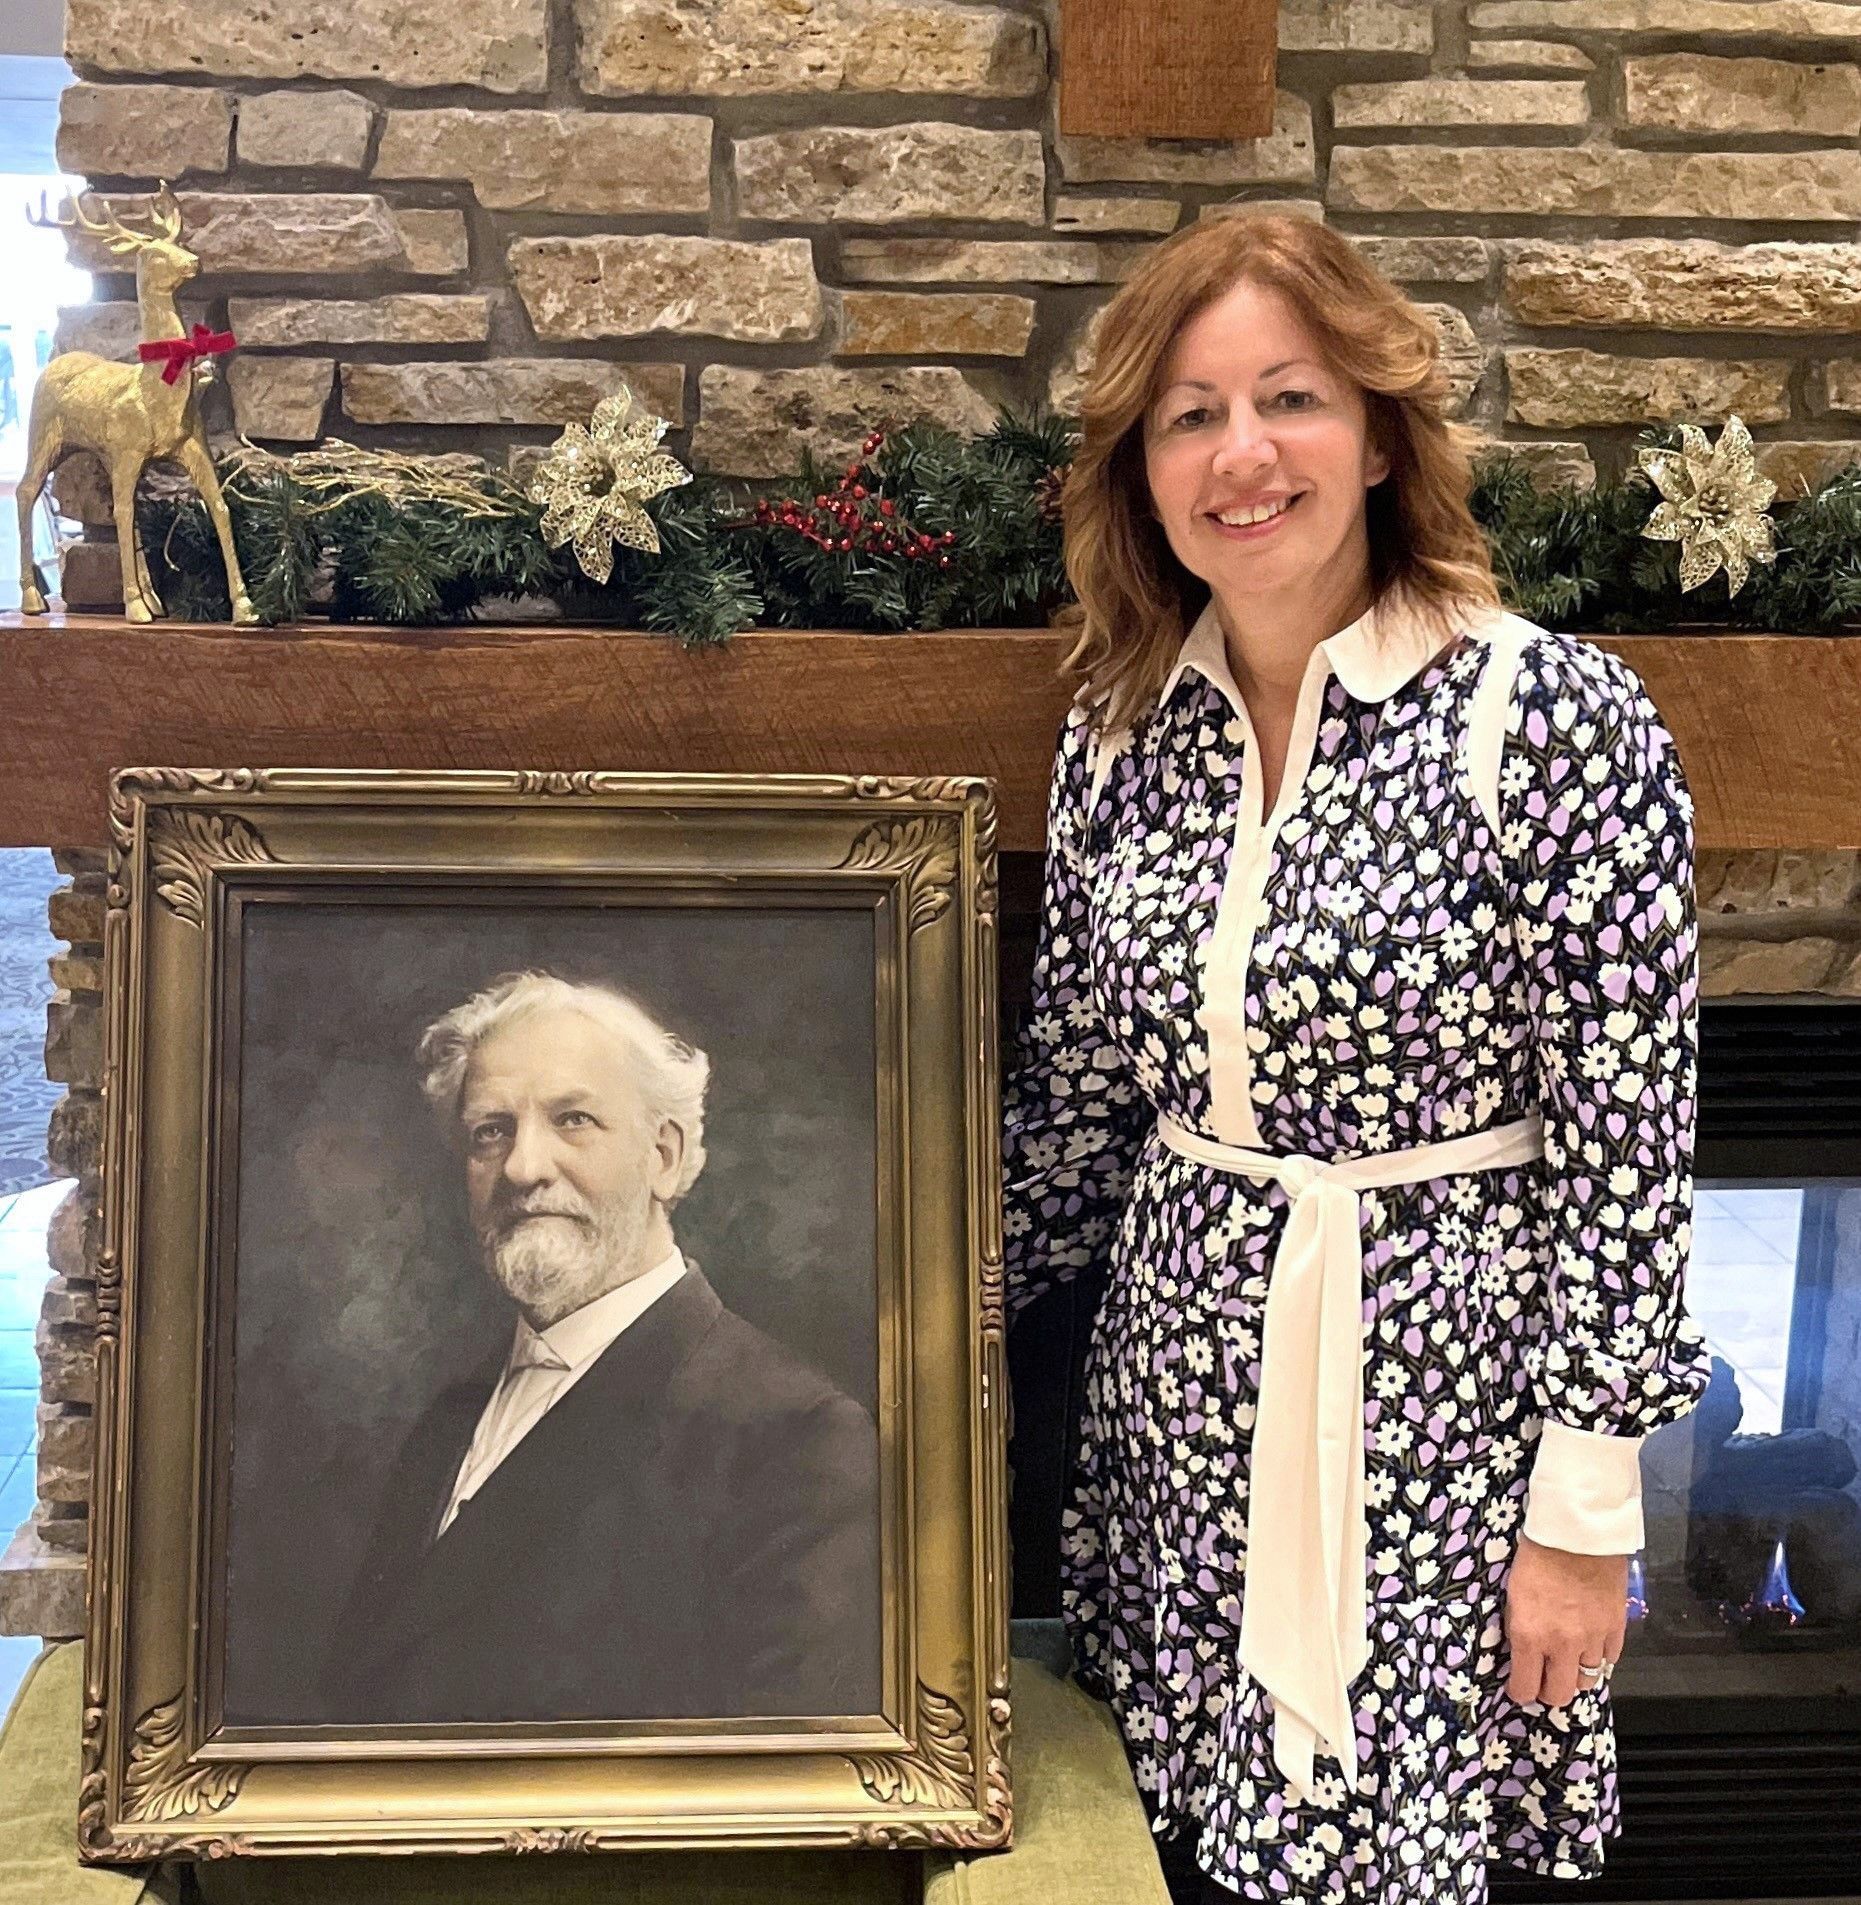 Vera poses next to the portrait of Alfred Anderson, the first chief executive of the organization.